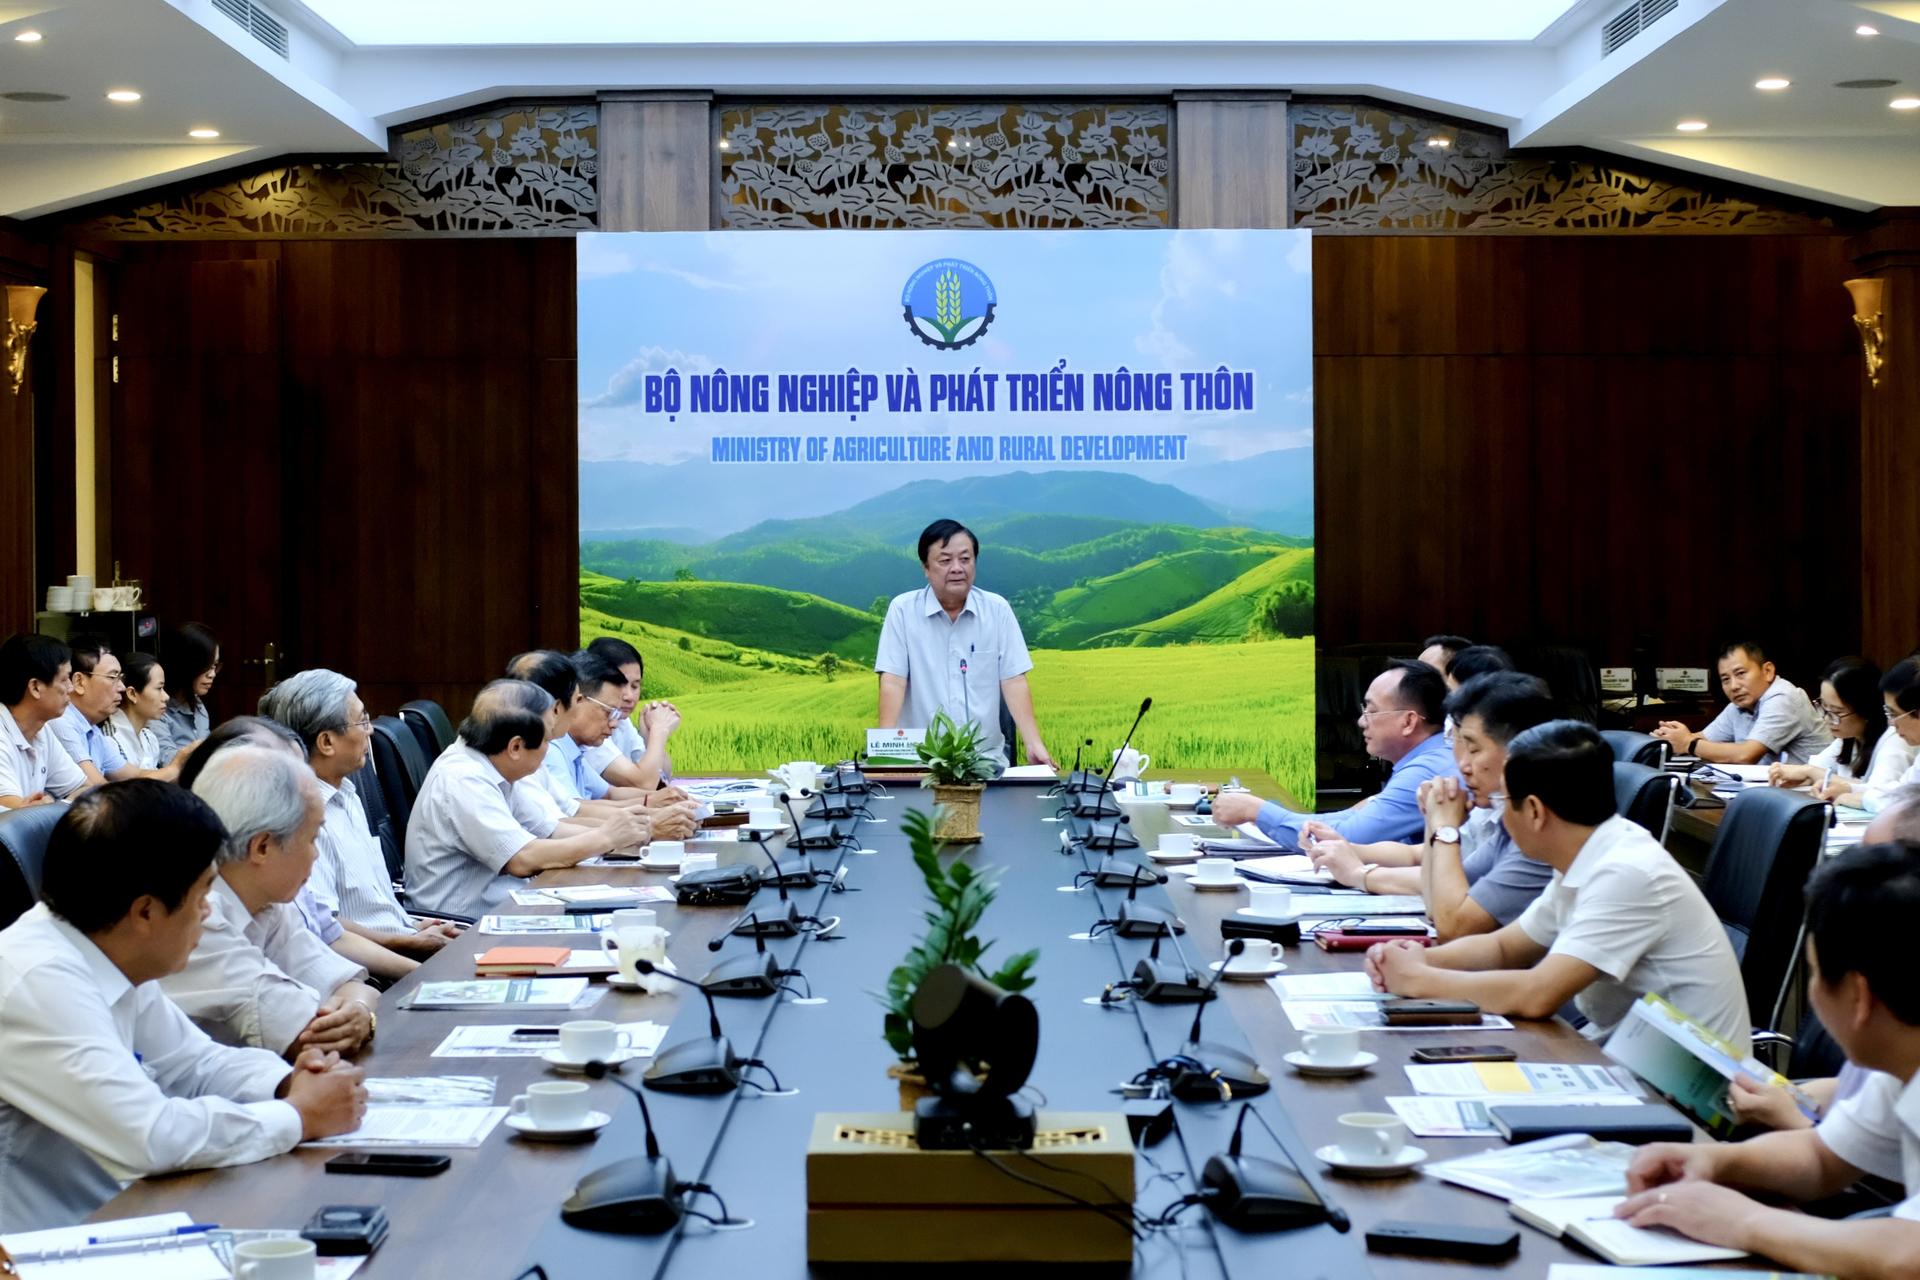 Minister Le Minh Hoan works with the Vietnam General Association of Agriculture and Rural Development, the Gardening Association, and the Vietnam Economic Science Association of Agriculture and Rural Development. Photo: Quynh Chi.